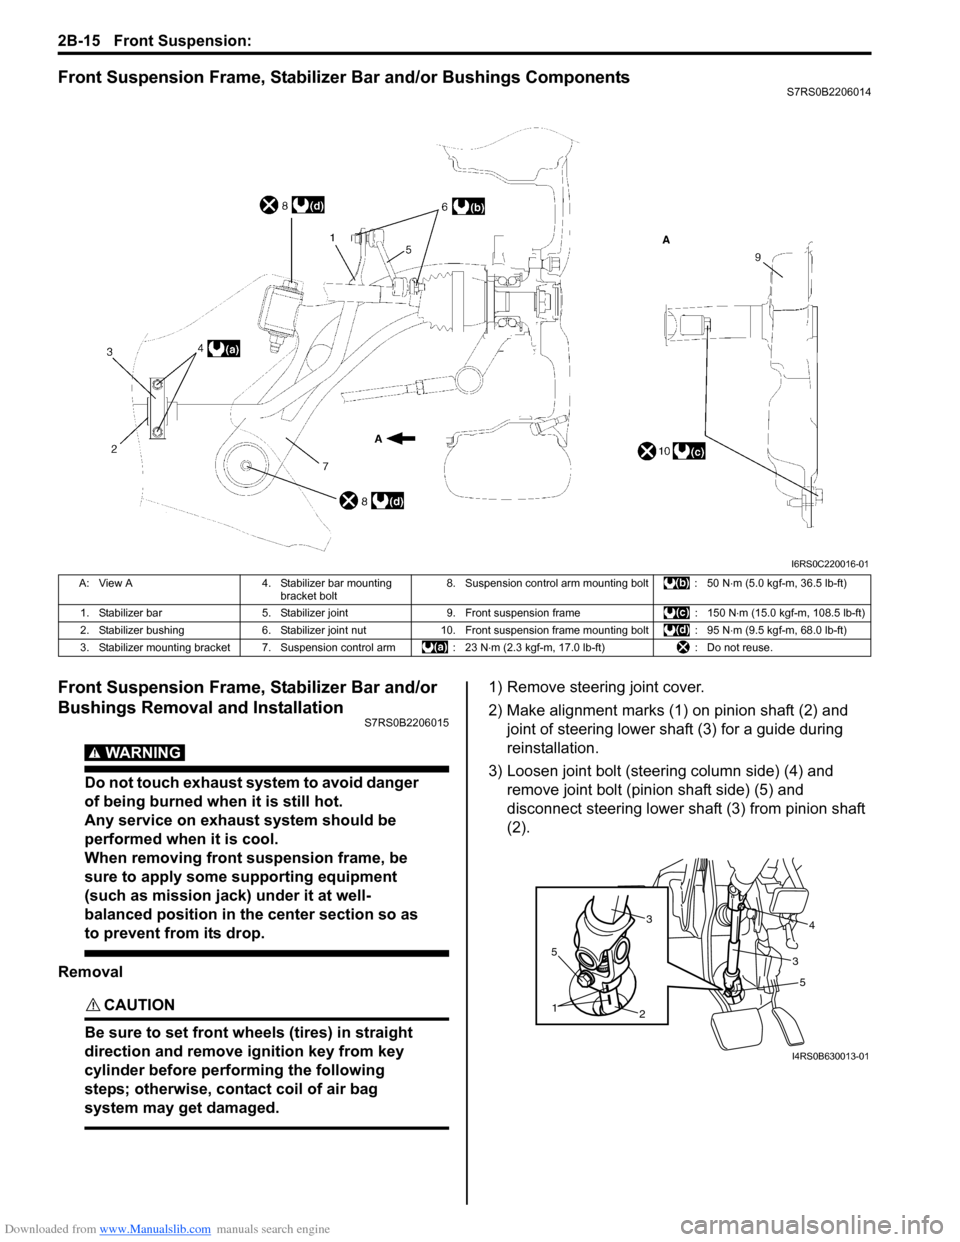 SUZUKI SWIFT 2008 2.G Service Workshop Manual Downloaded from www.Manualslib.com manuals search engine 2B-15 Front Suspension: 
Front Suspension Frame, Stabilizer Bar and/or Bushings ComponentsS7RS0B2206014
Front Suspension Frame, Stabilizer Bar 